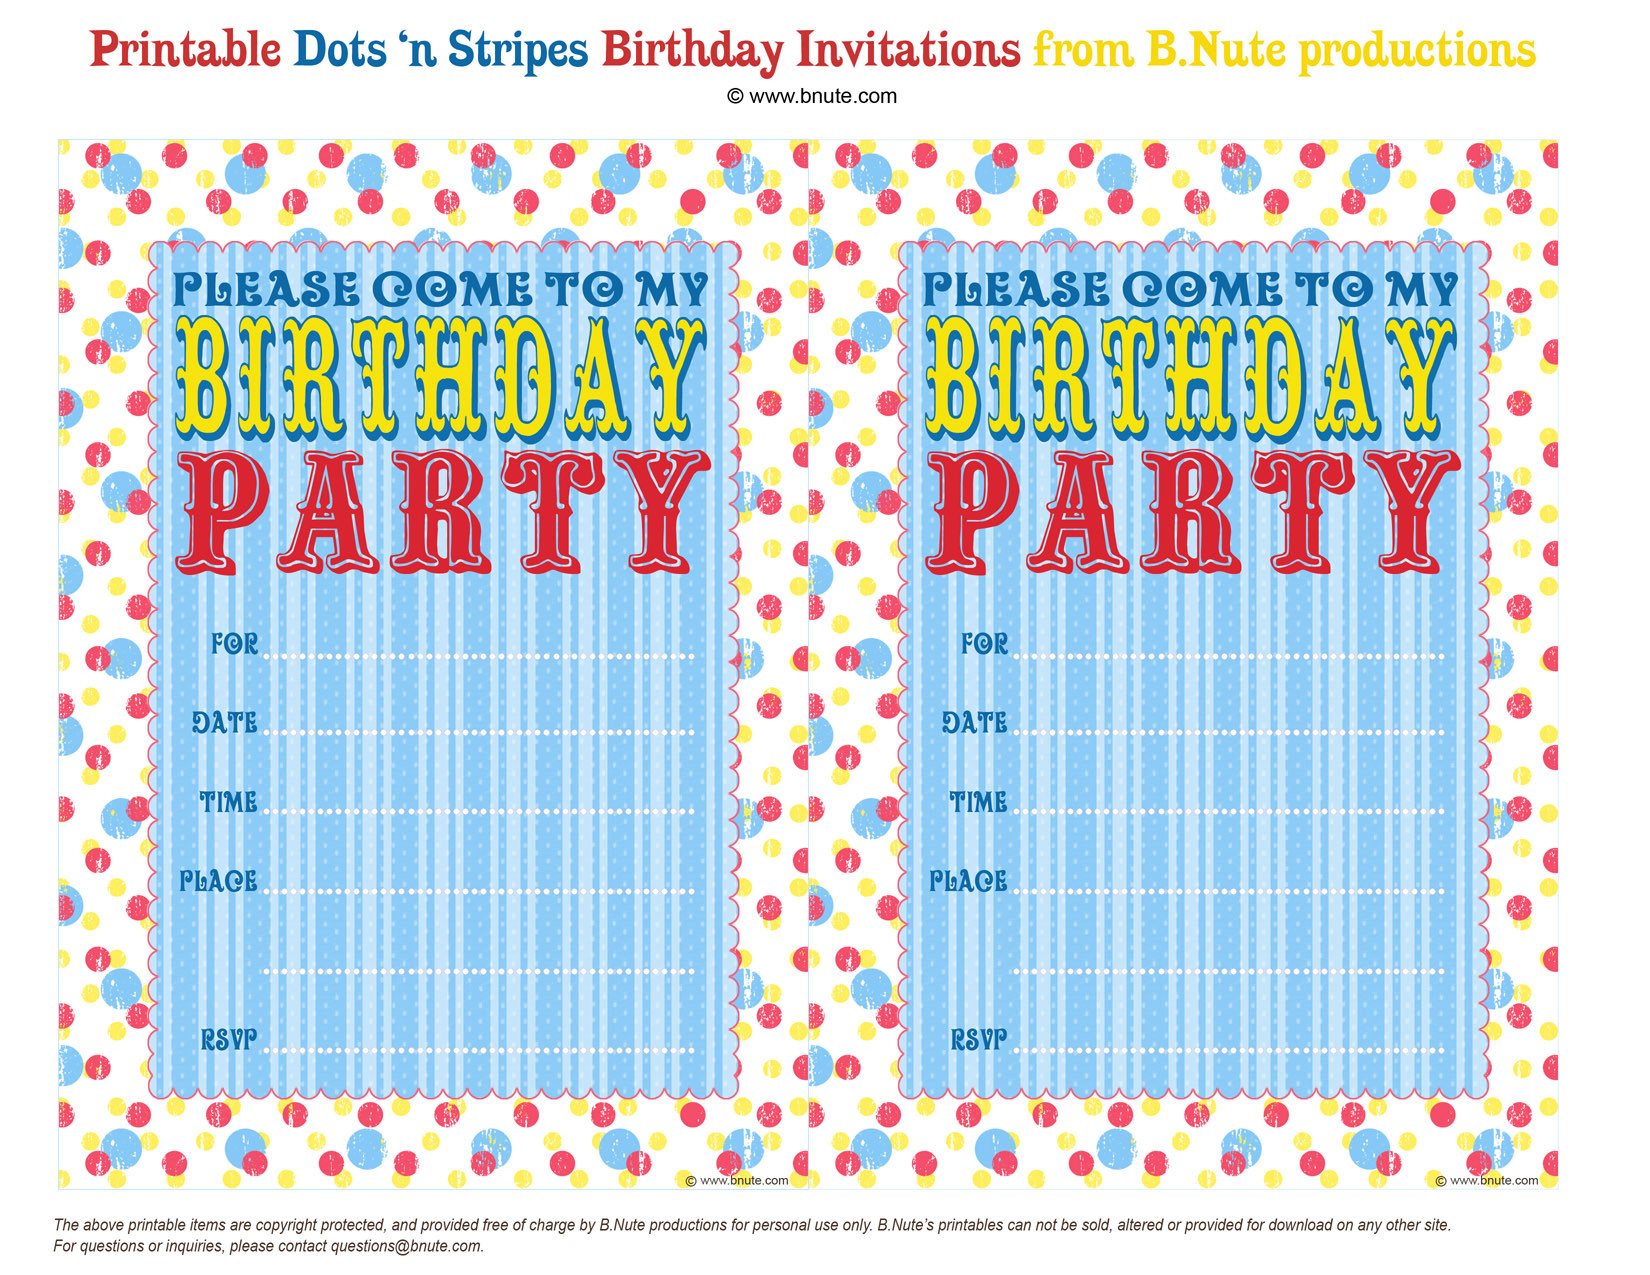 Birthday Party Invitations Free
 bnute productions Free Printable Dots n Stripes Birthday